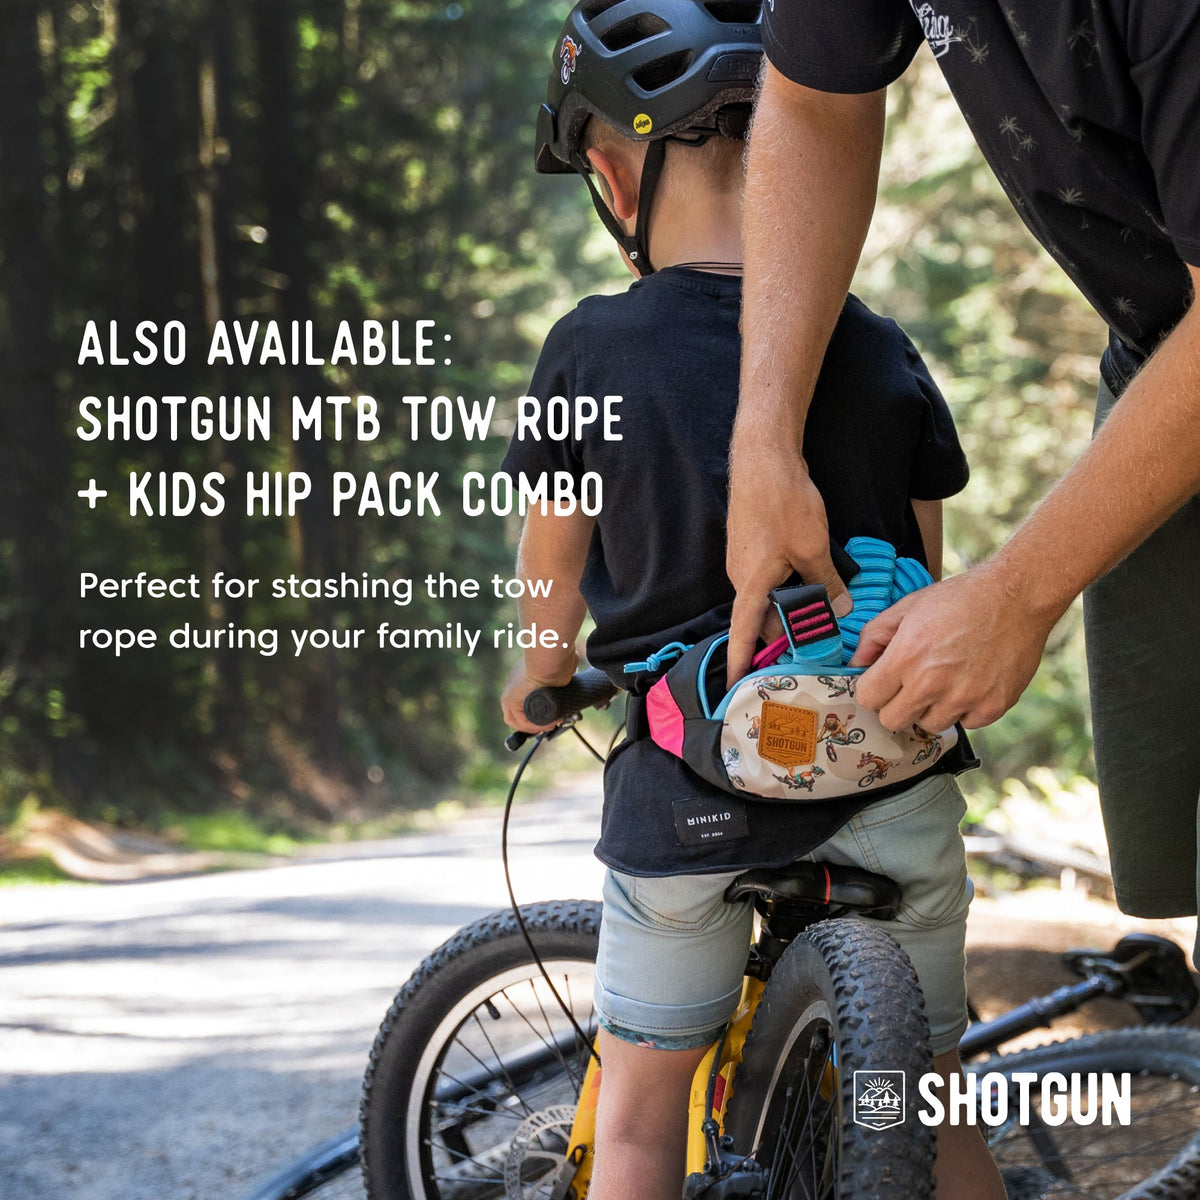 How to use the Shotgun MTB Tow Rope 